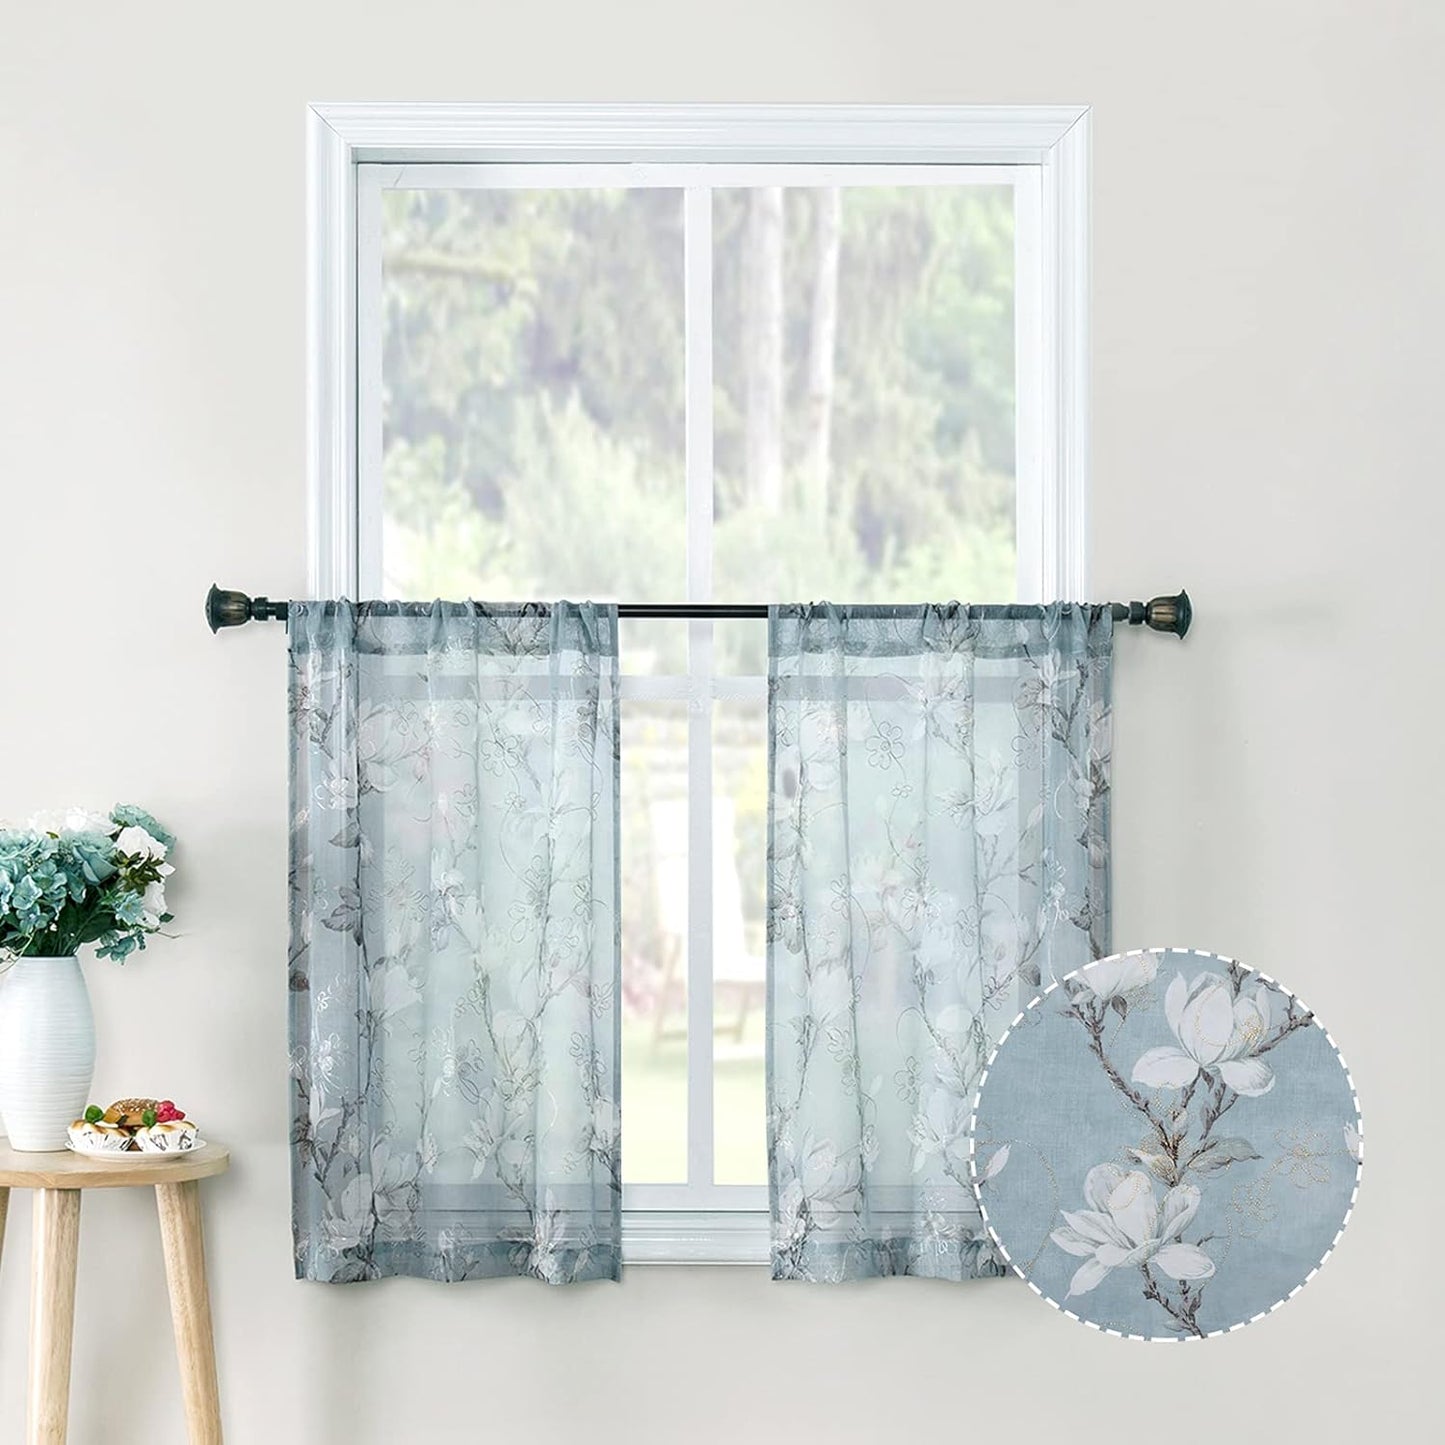 Tollpiz Floral White Sheer Curtain Flower Print Vine Embroidery Bedroom Curtains Rod Pocket Voile Window Curtain for Living Room, 54 X 84 Inches Long, Set of 2 Panels  Tollpiz Tex Blue 30"W X 24"L 